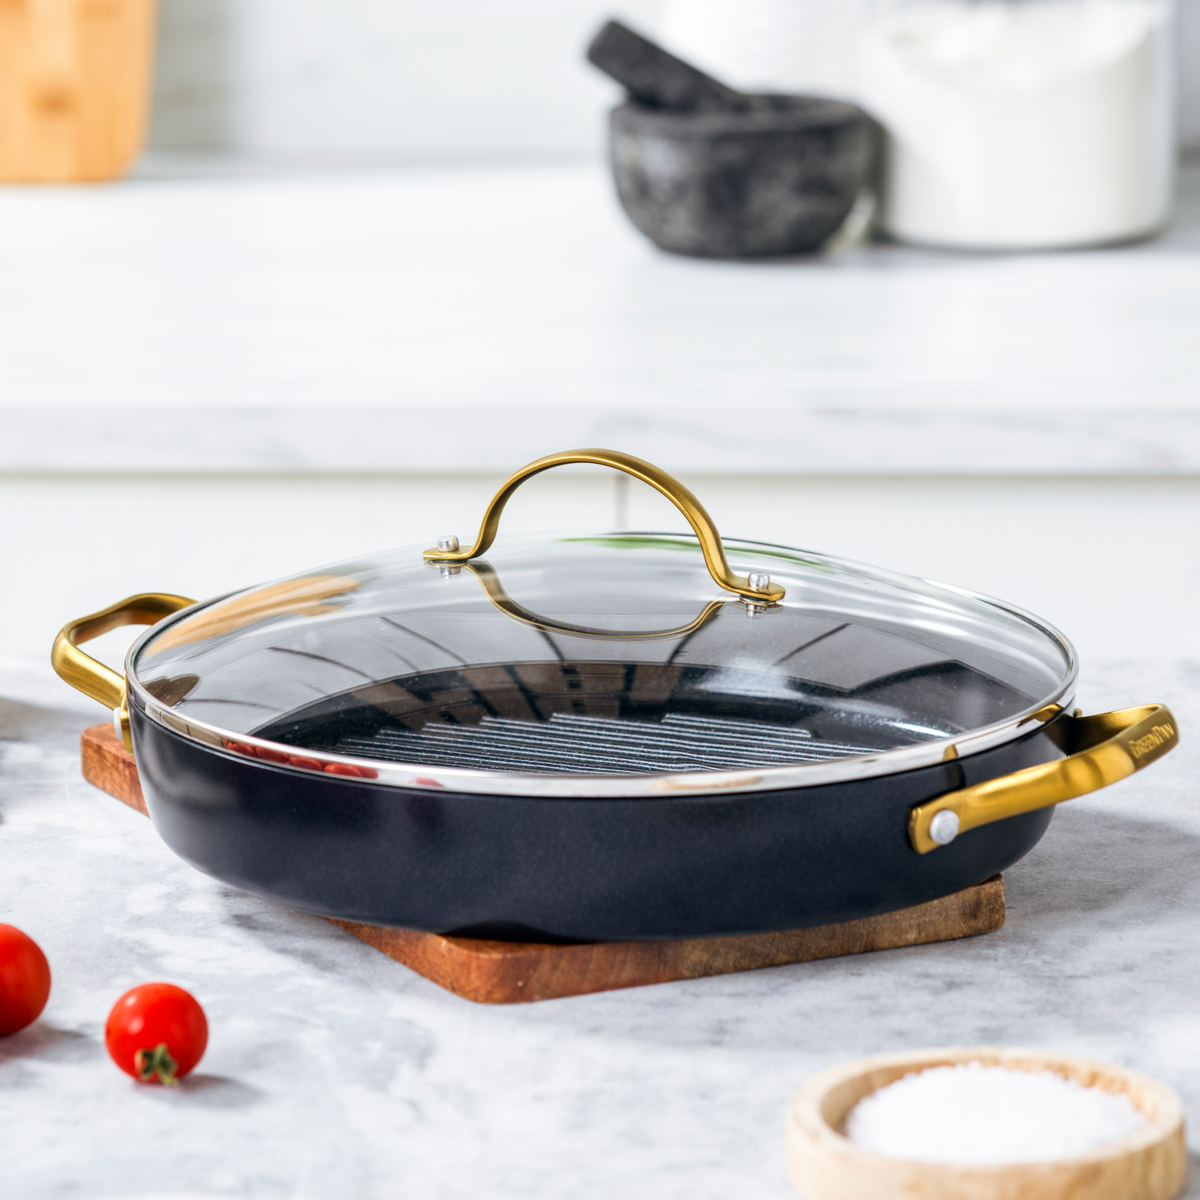 Reserve Ceramic Nonstick 11 Grill Pan with Lid | Black with Gold-Tone  Handle